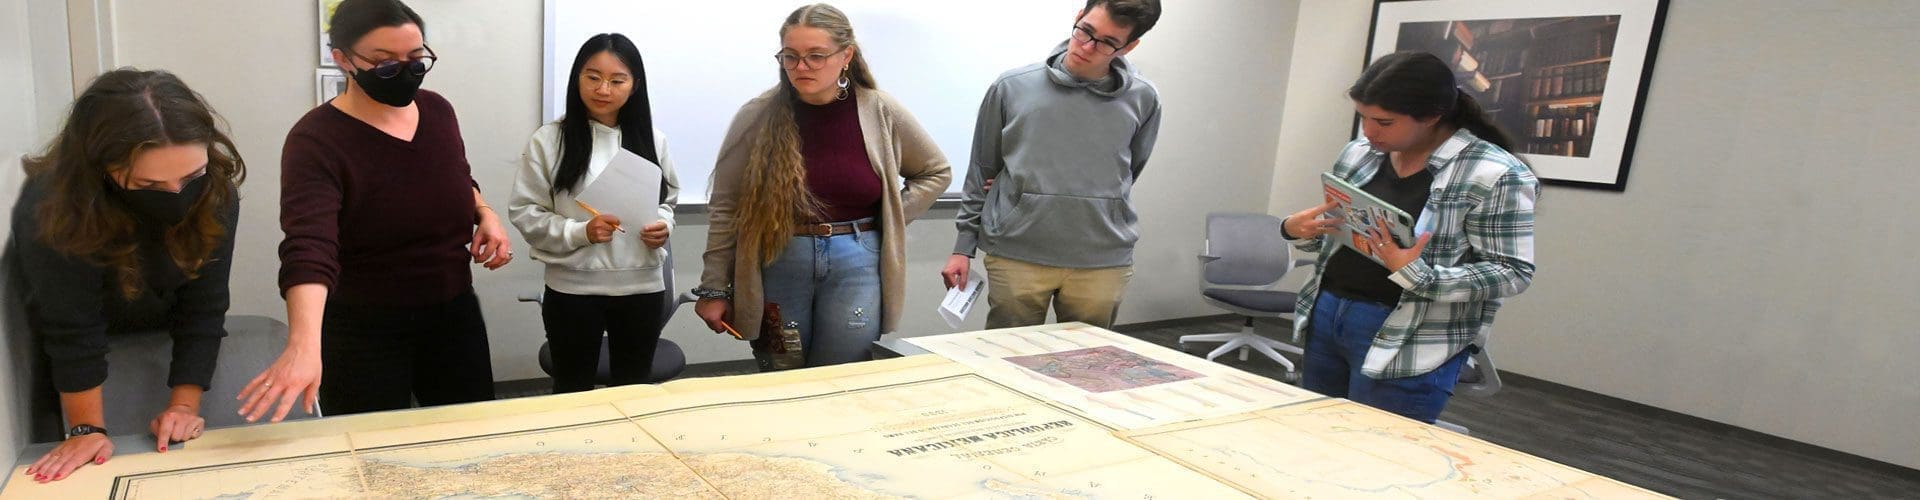 Prof. Casey Lurtz gestures at a table sized map of Mexico from the 19th Century while five students examine it.